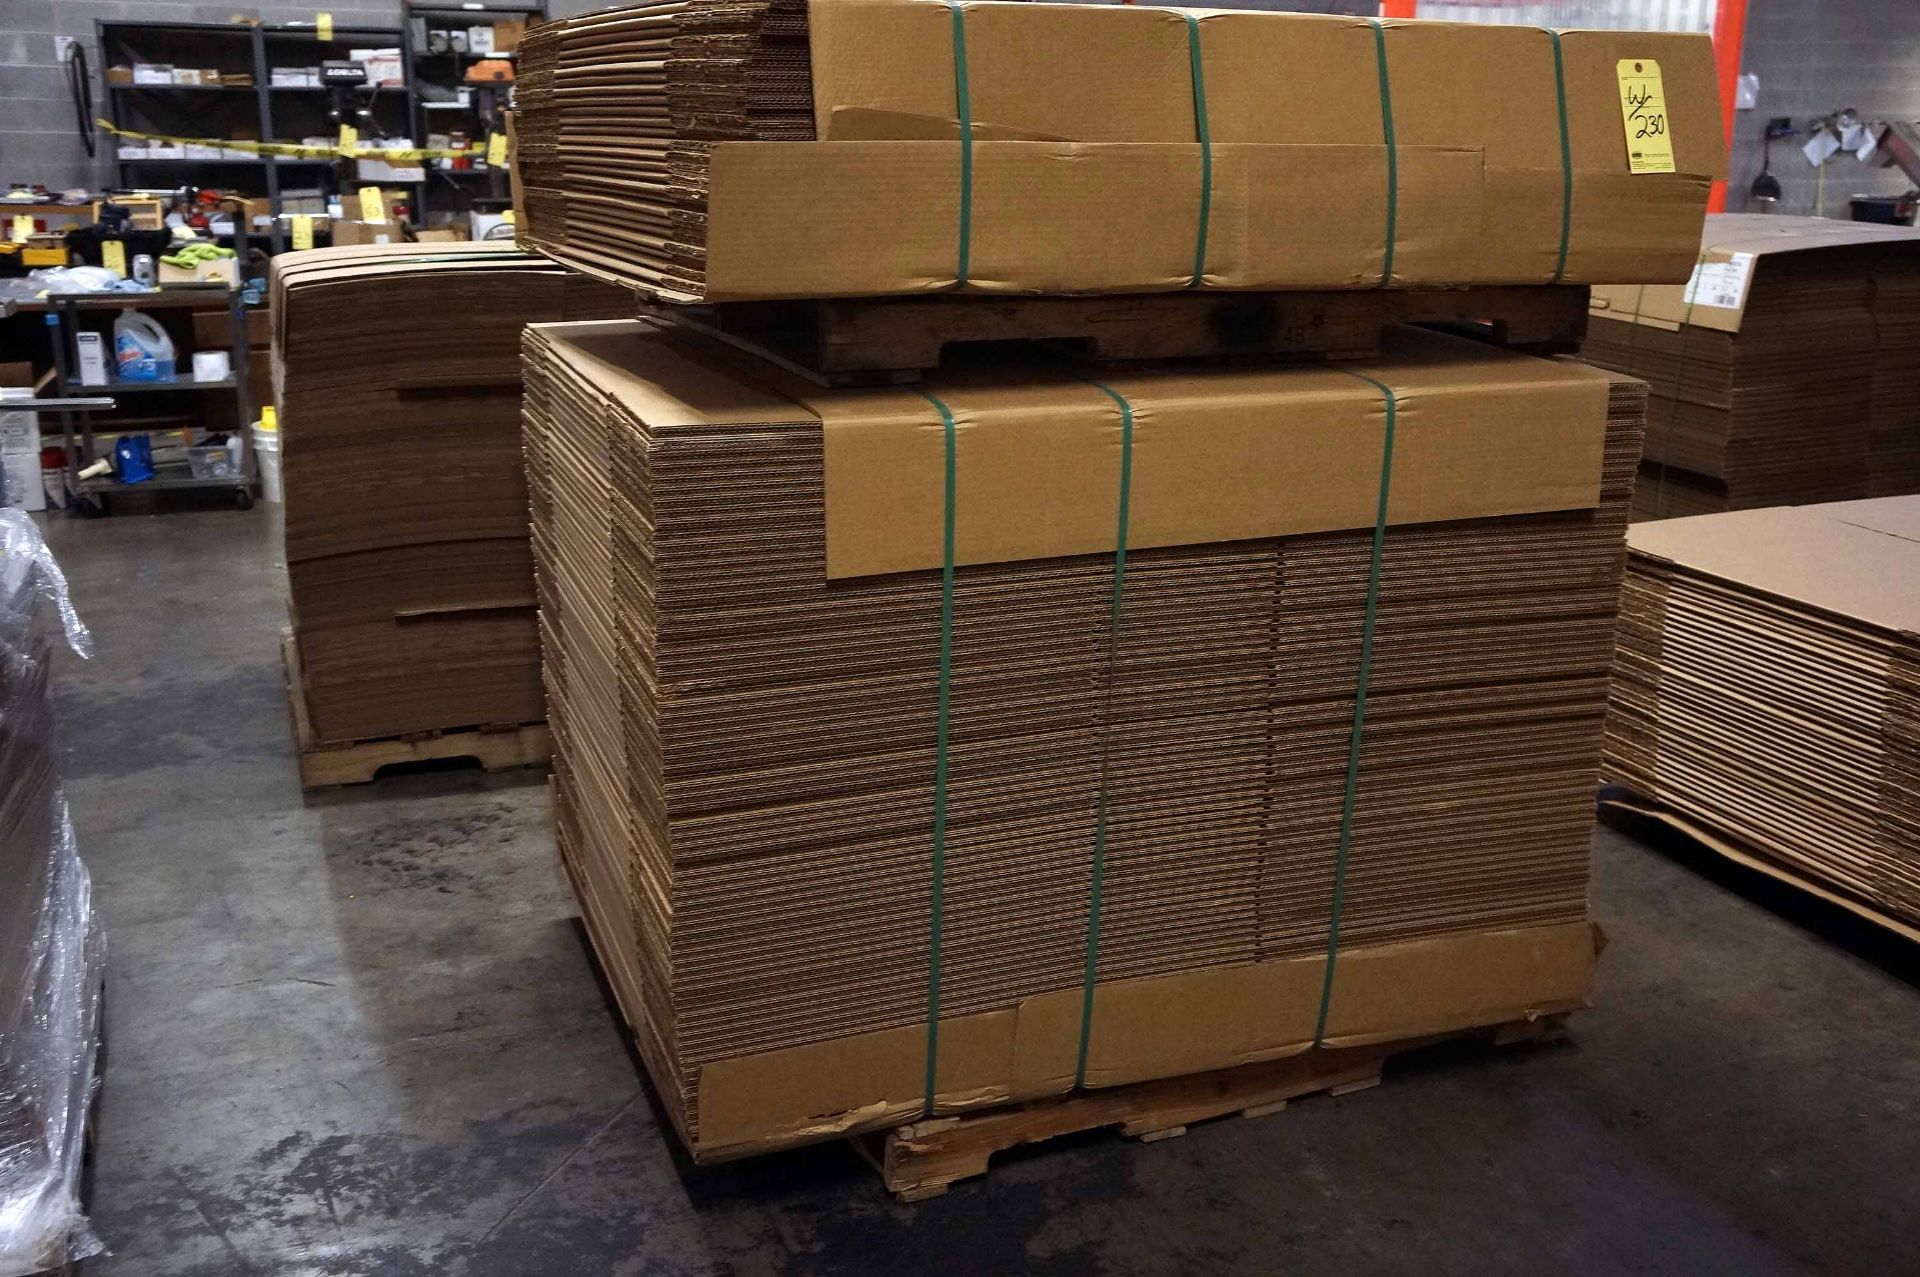 LOT OF CARDBOARD BOXES: 32-7/8" x 22-1/2" x 7-1/4" (one pallet), 20" x 10-1/4" x 5" (one pallet), - Image 8 of 8